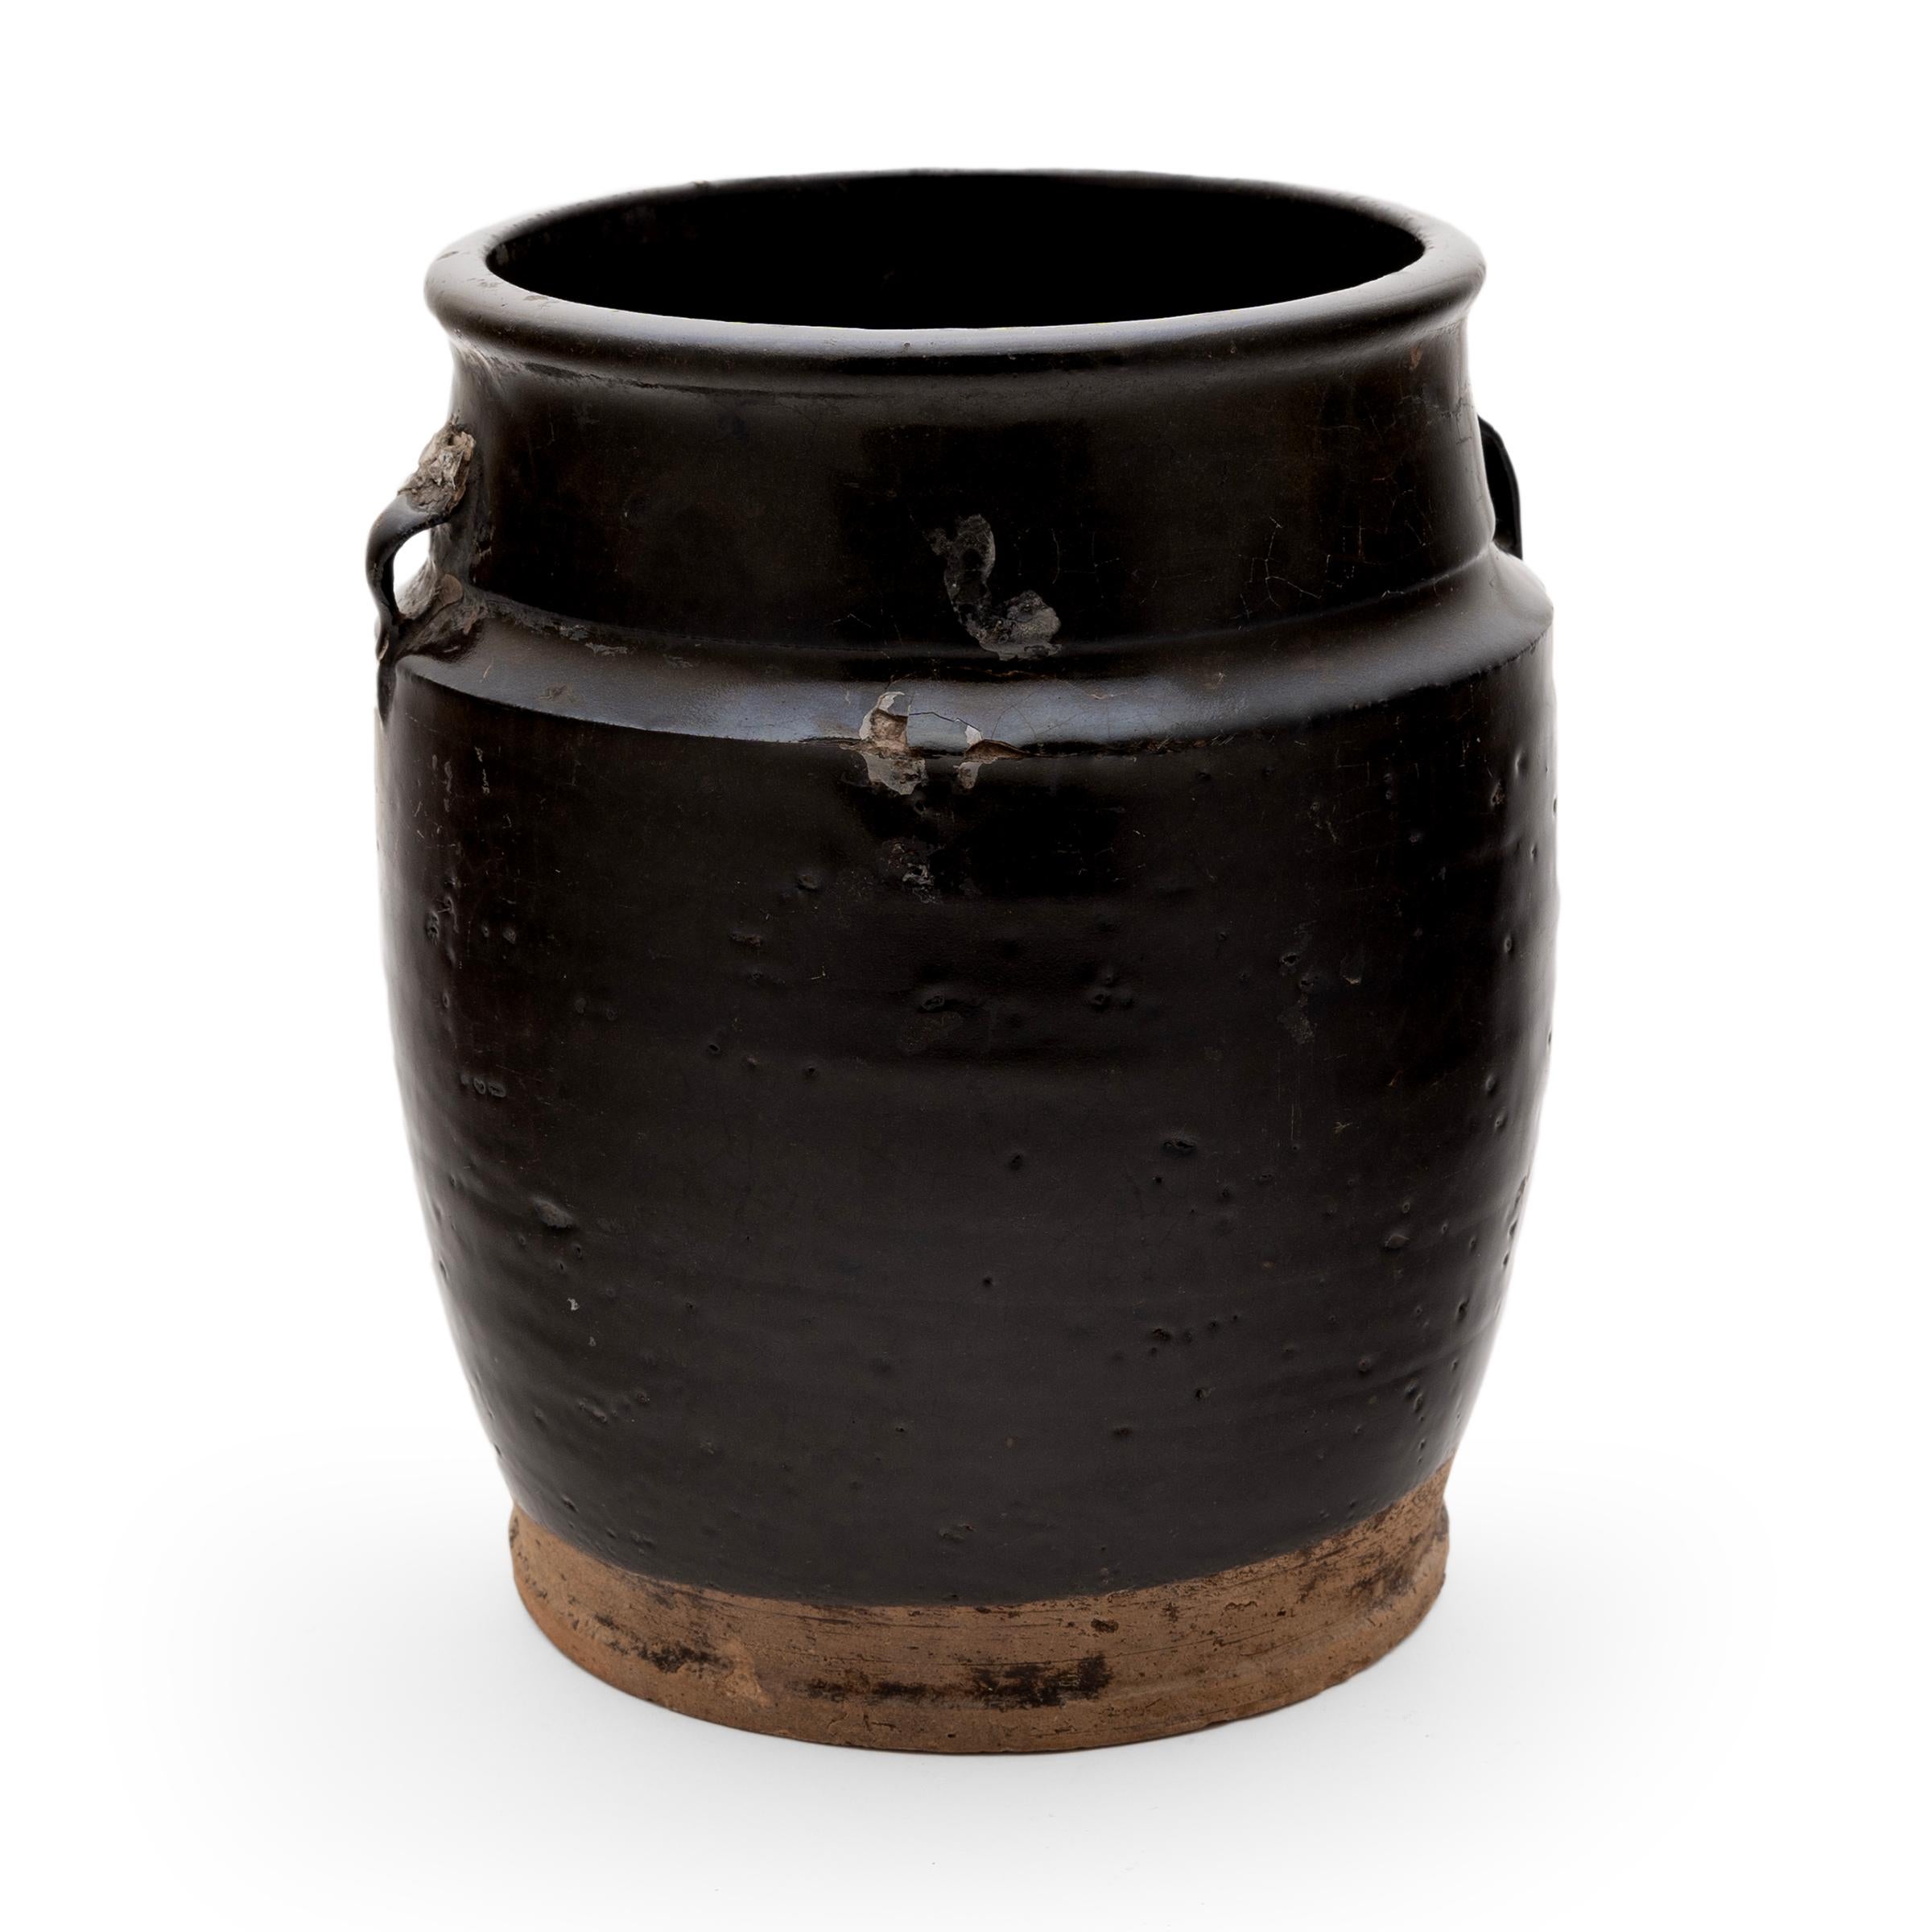 A cool, blue-black glaze coats the stout body of this early 20th-century terra cotta kitchen jar. As evidenced by the glazed interior, the wide-mouth jar was once used daily in a provincial Chinese kitchen for fermenting foods and condiments. The